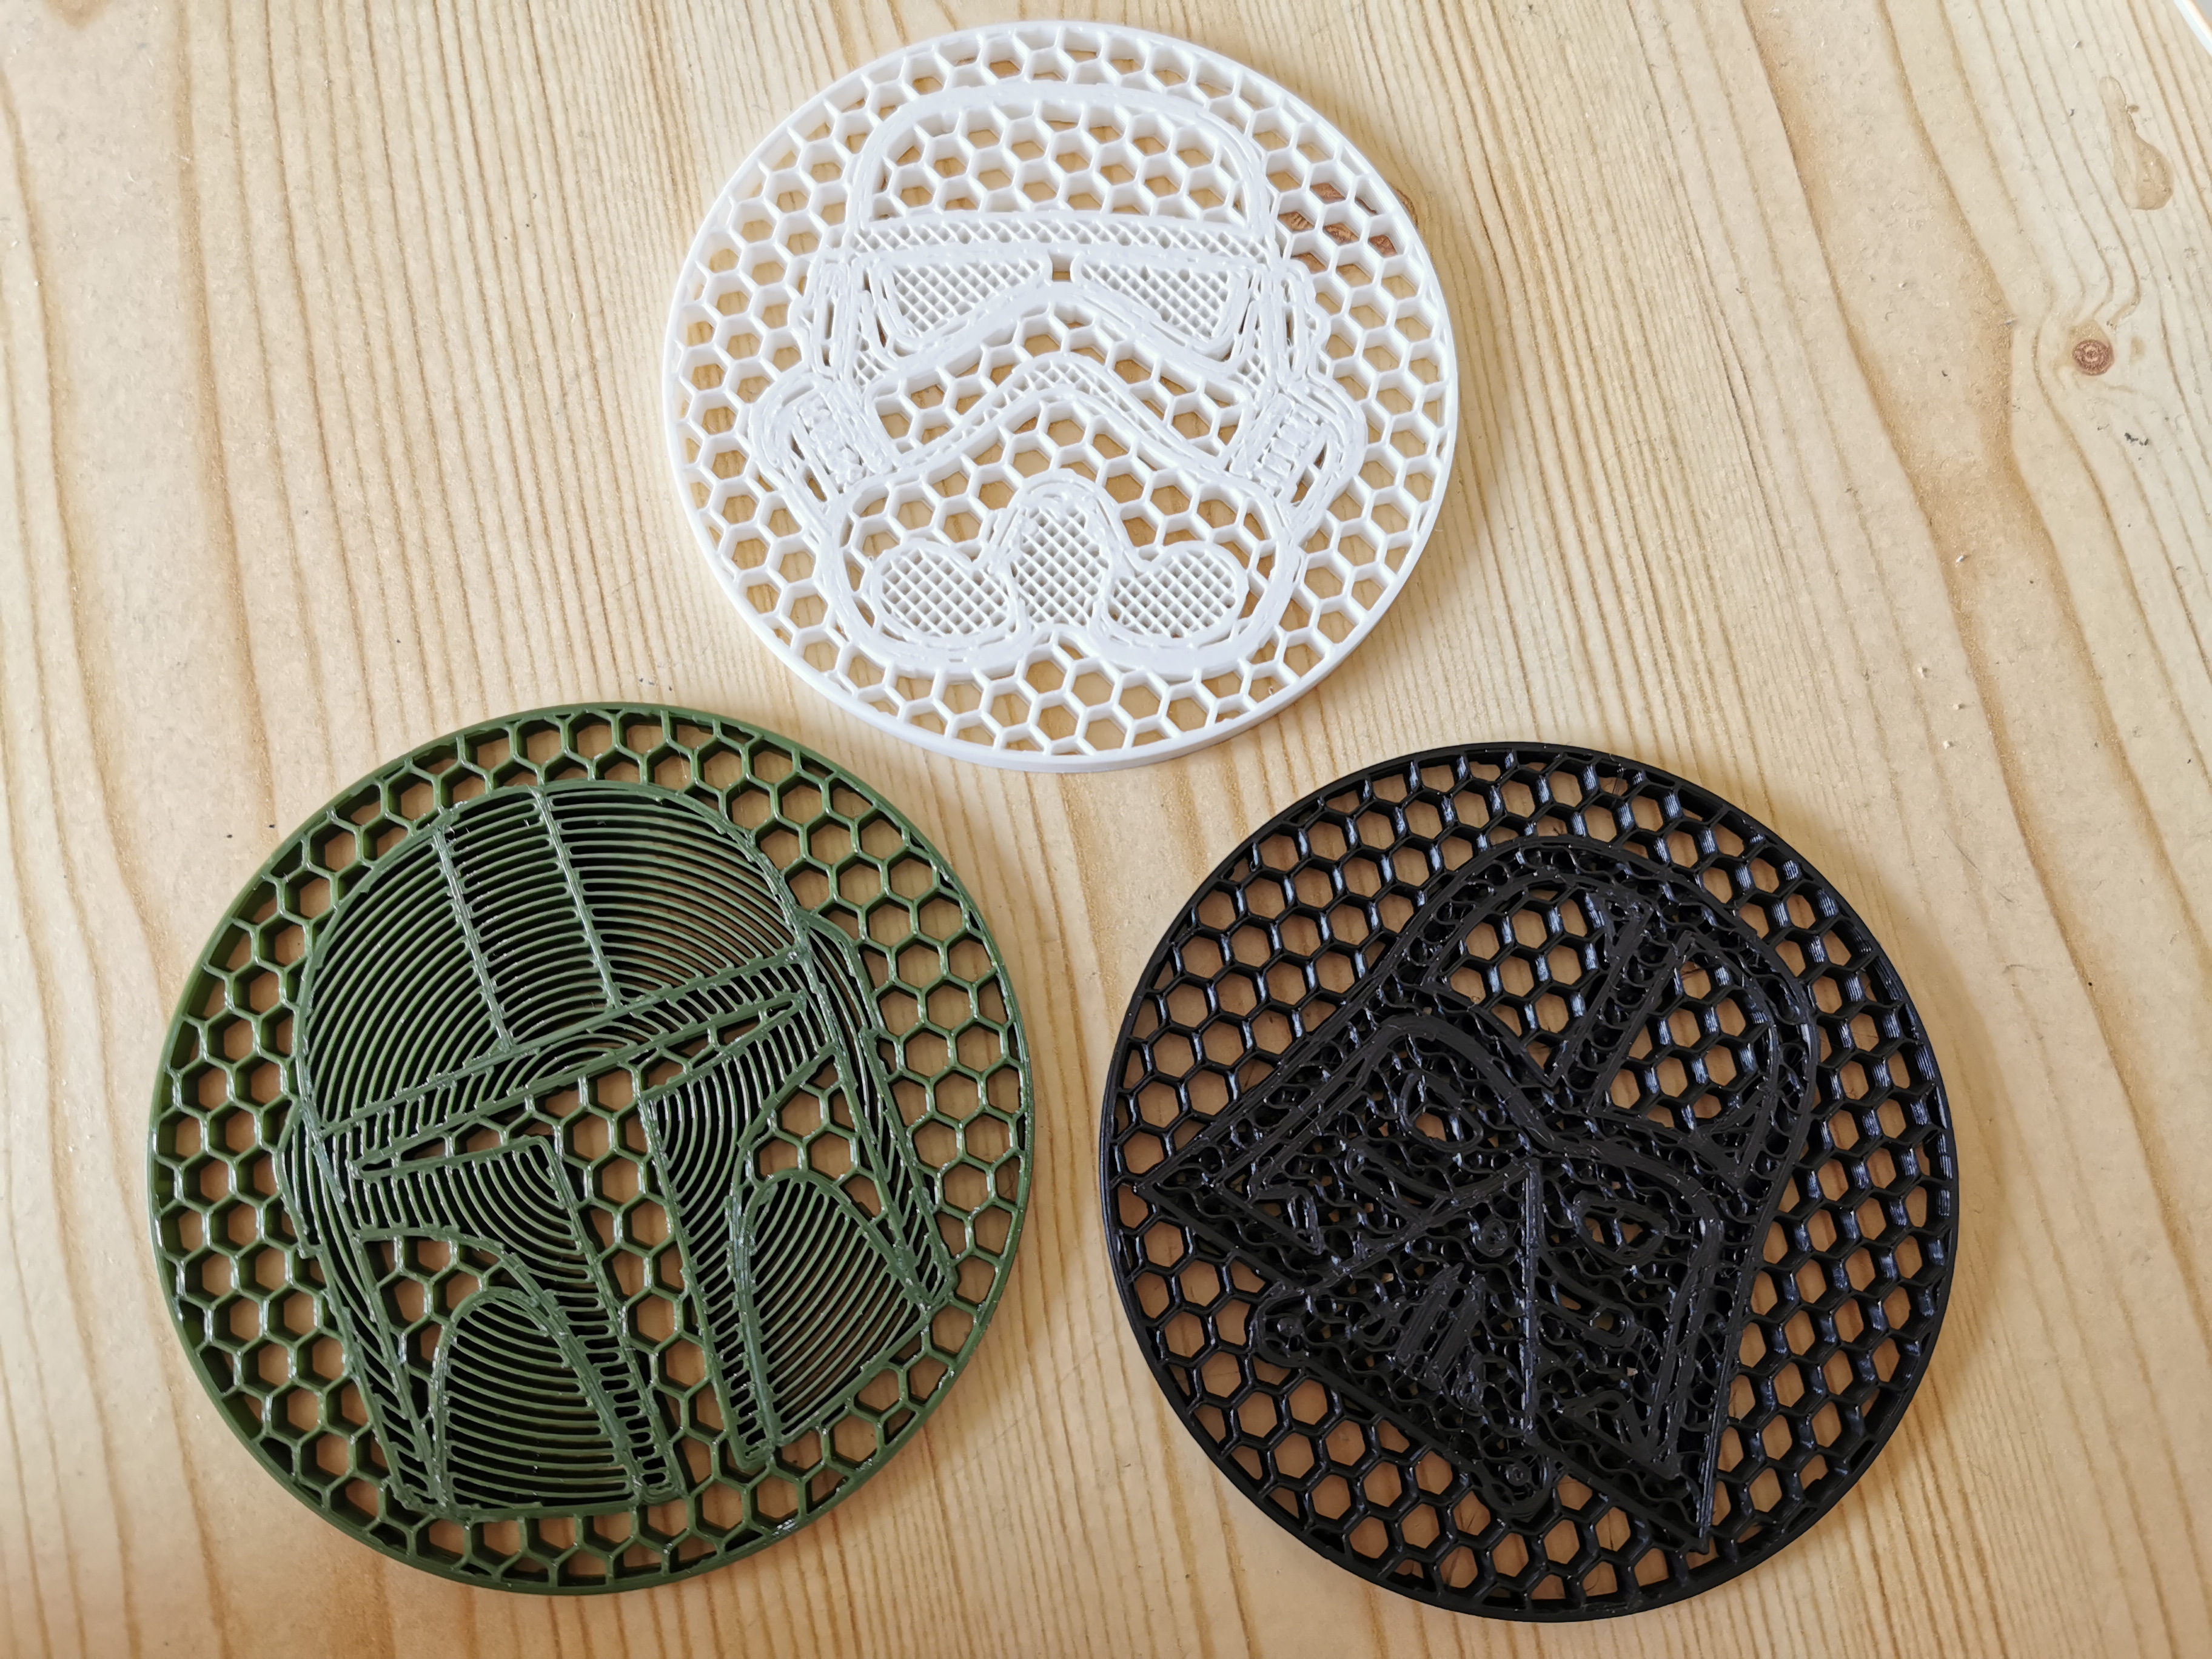 Infill StarWars clipart coasters